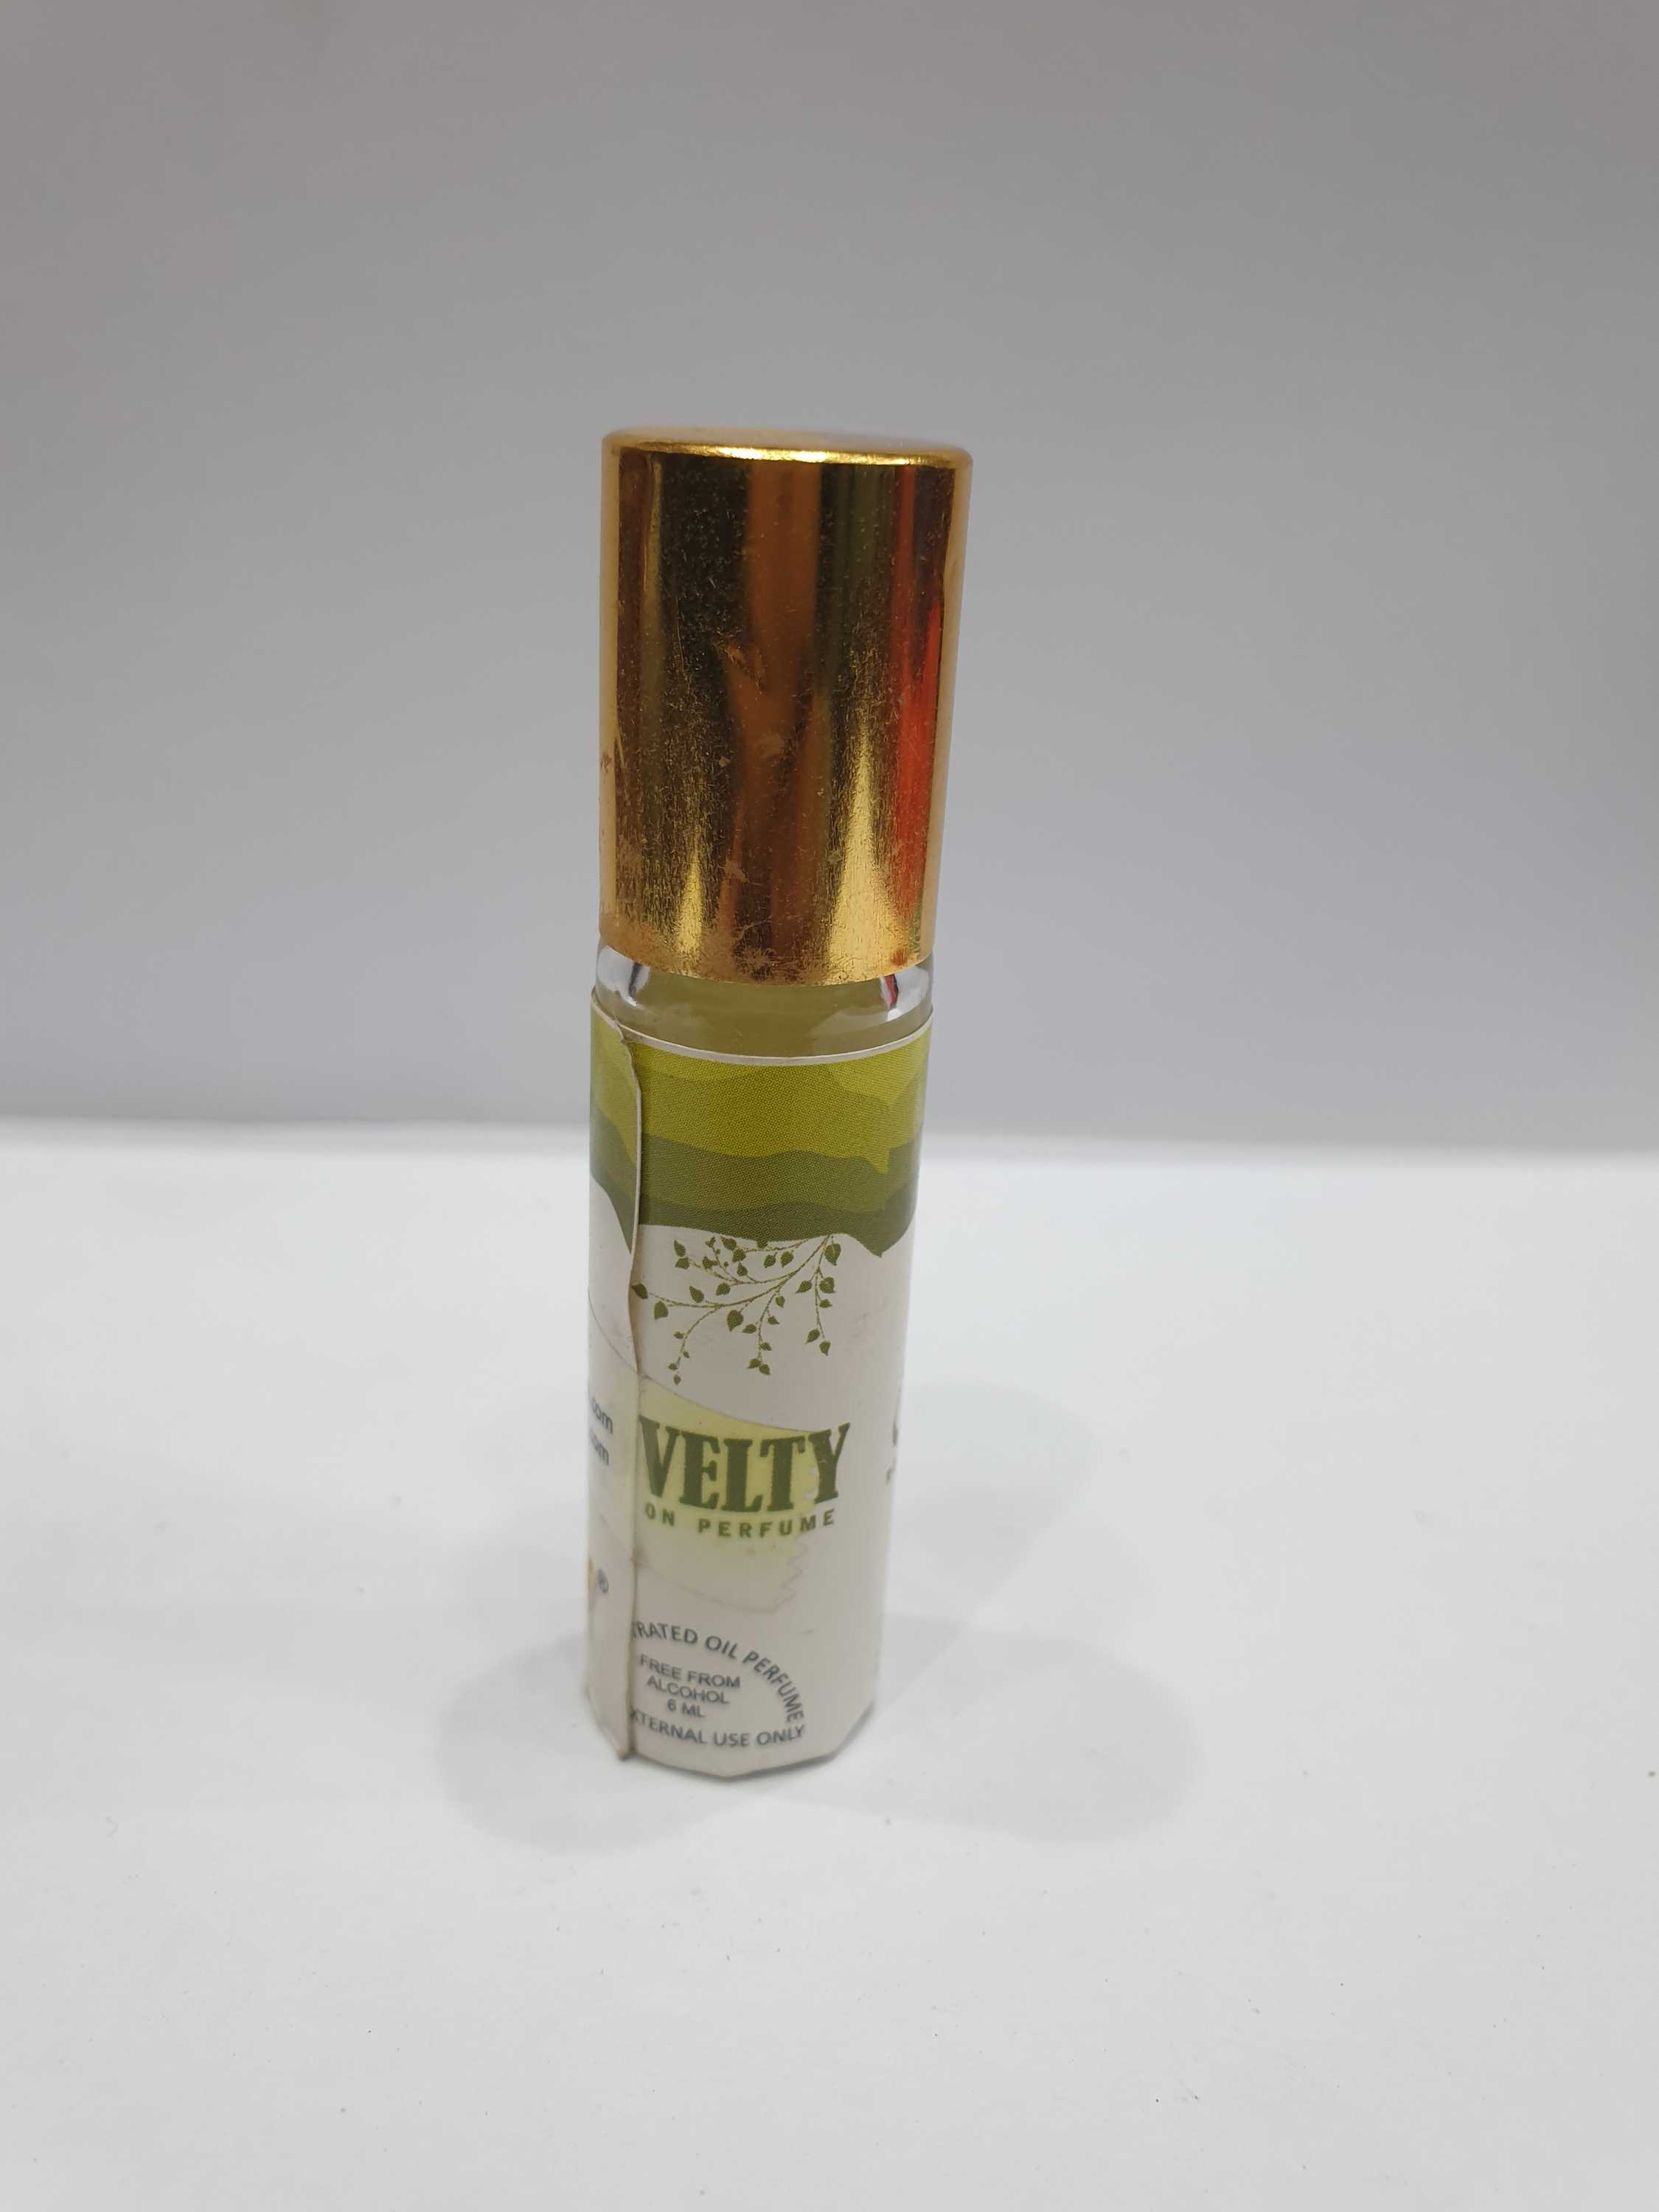 Attar - Handmade Natural Perfume Form Herbal Extract, velty, 6ml, roll On